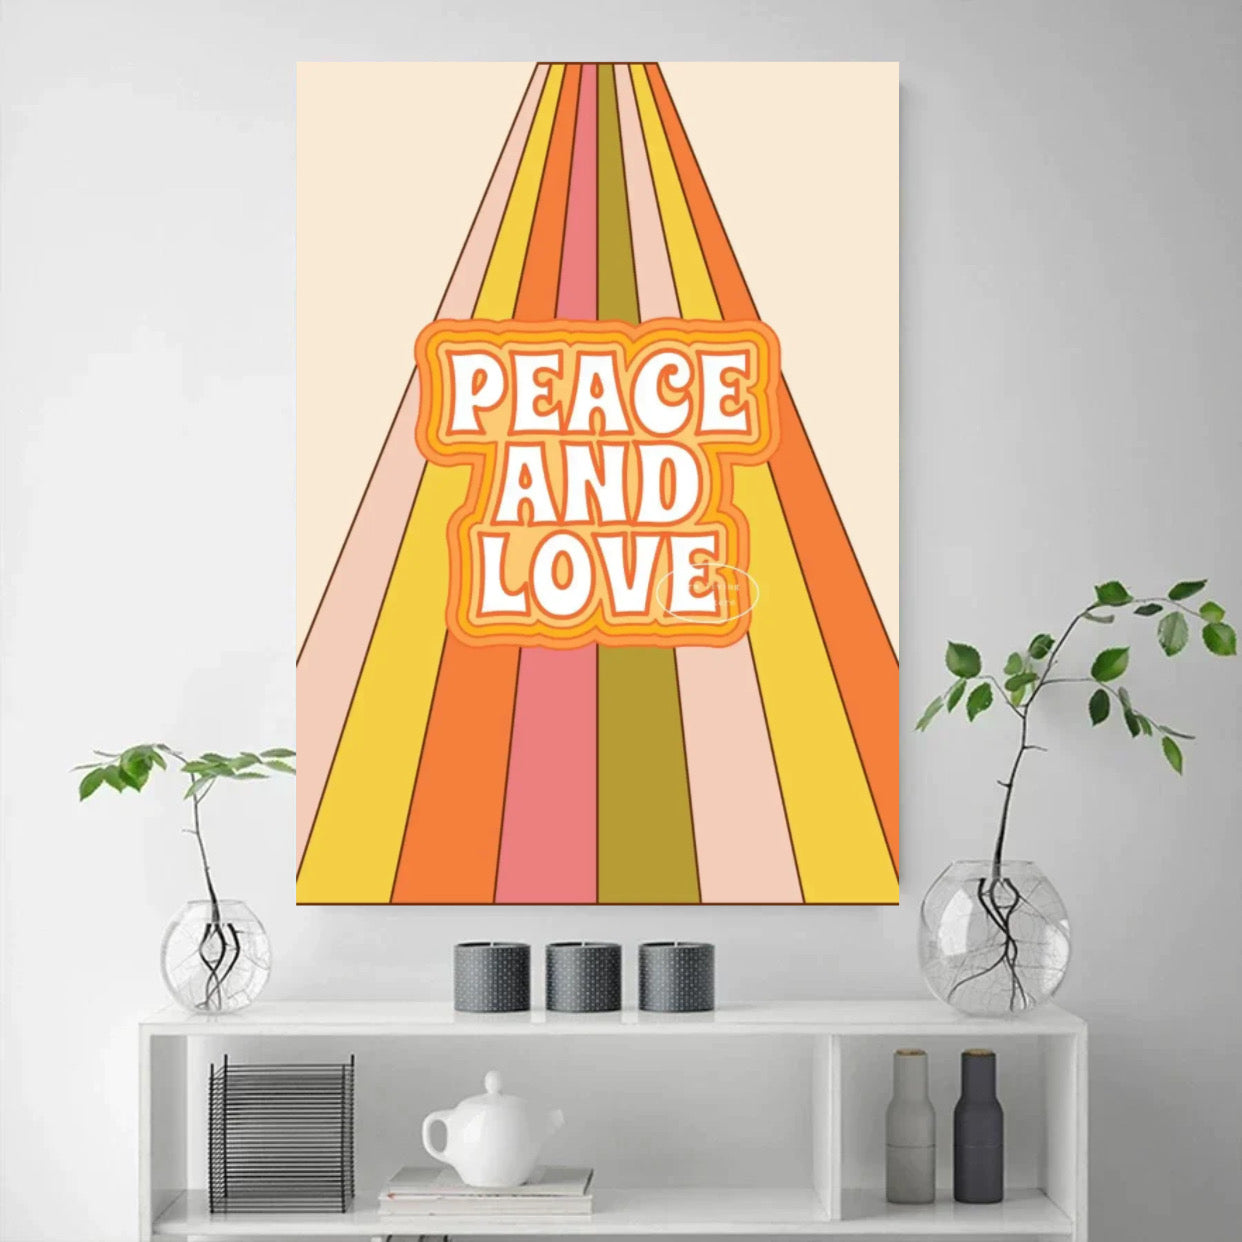 "peace and love" poster